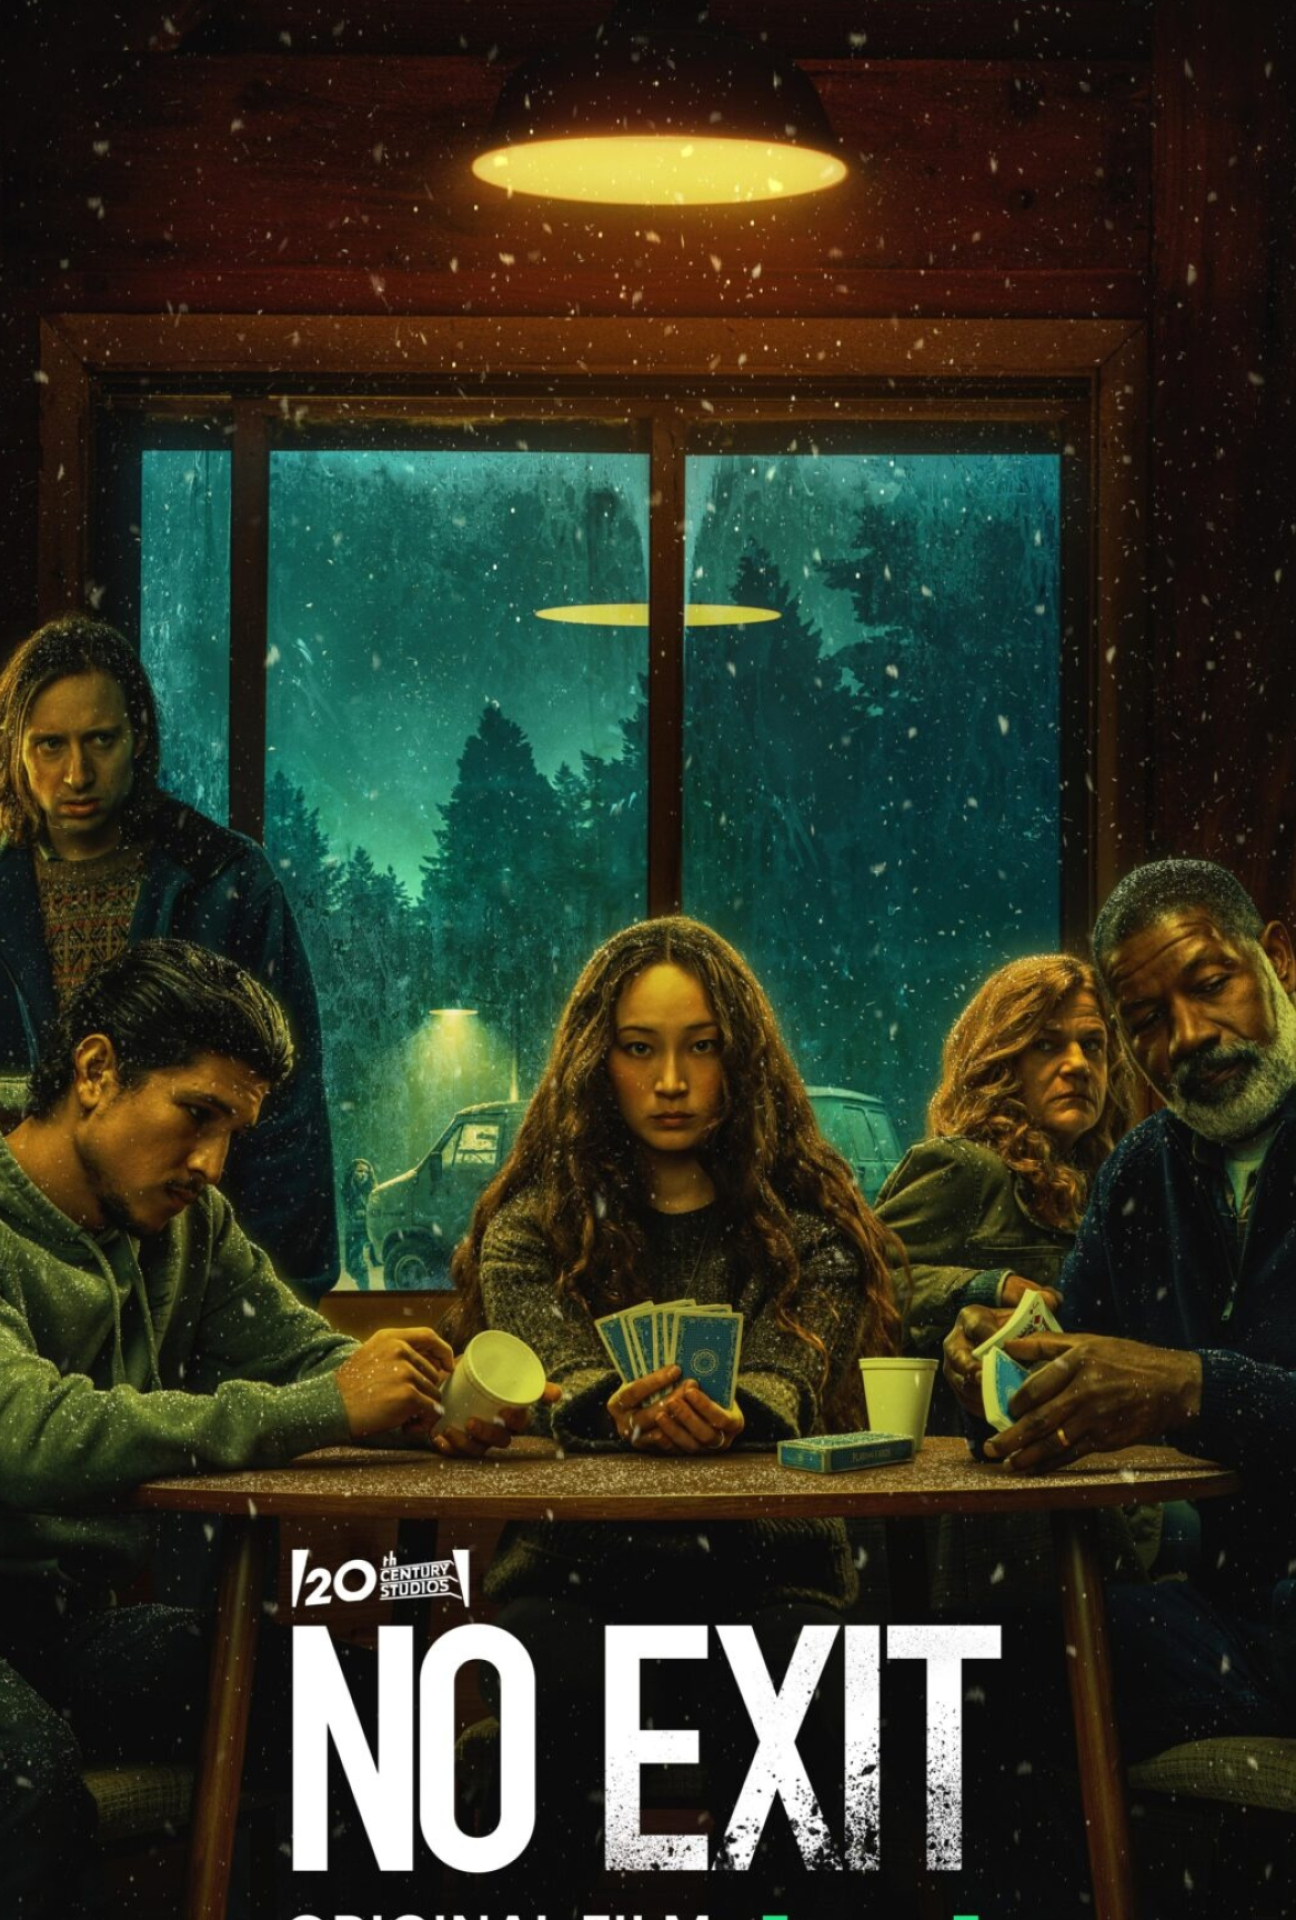 No Exit movie, Character posters, Disney Plus release, Intriguing storyline, 1300x1920 HD Handy